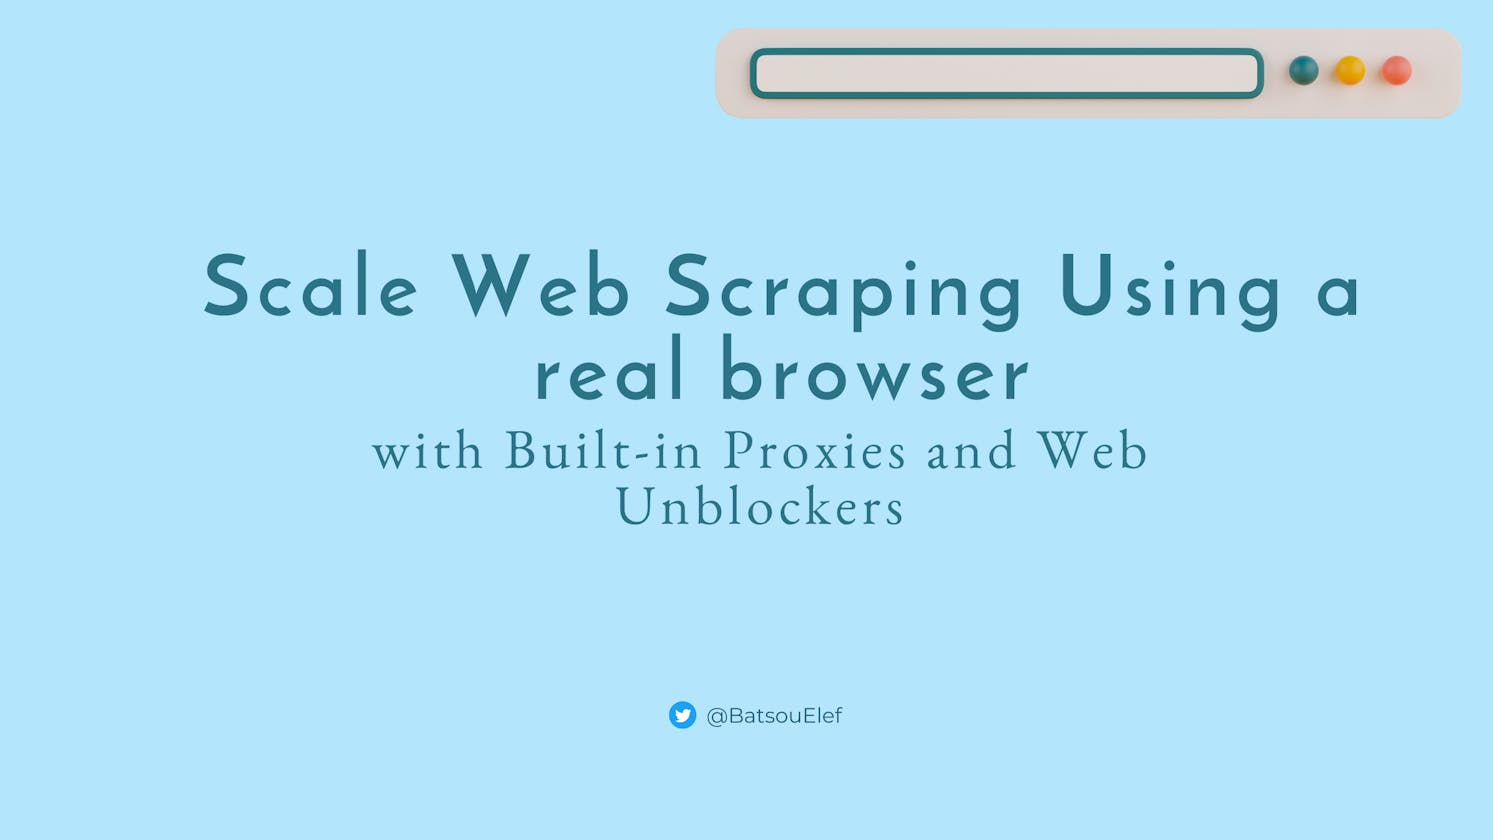 Scale Web Scraping Using a Real Browser with Built-in Proxies and Web Unblockers